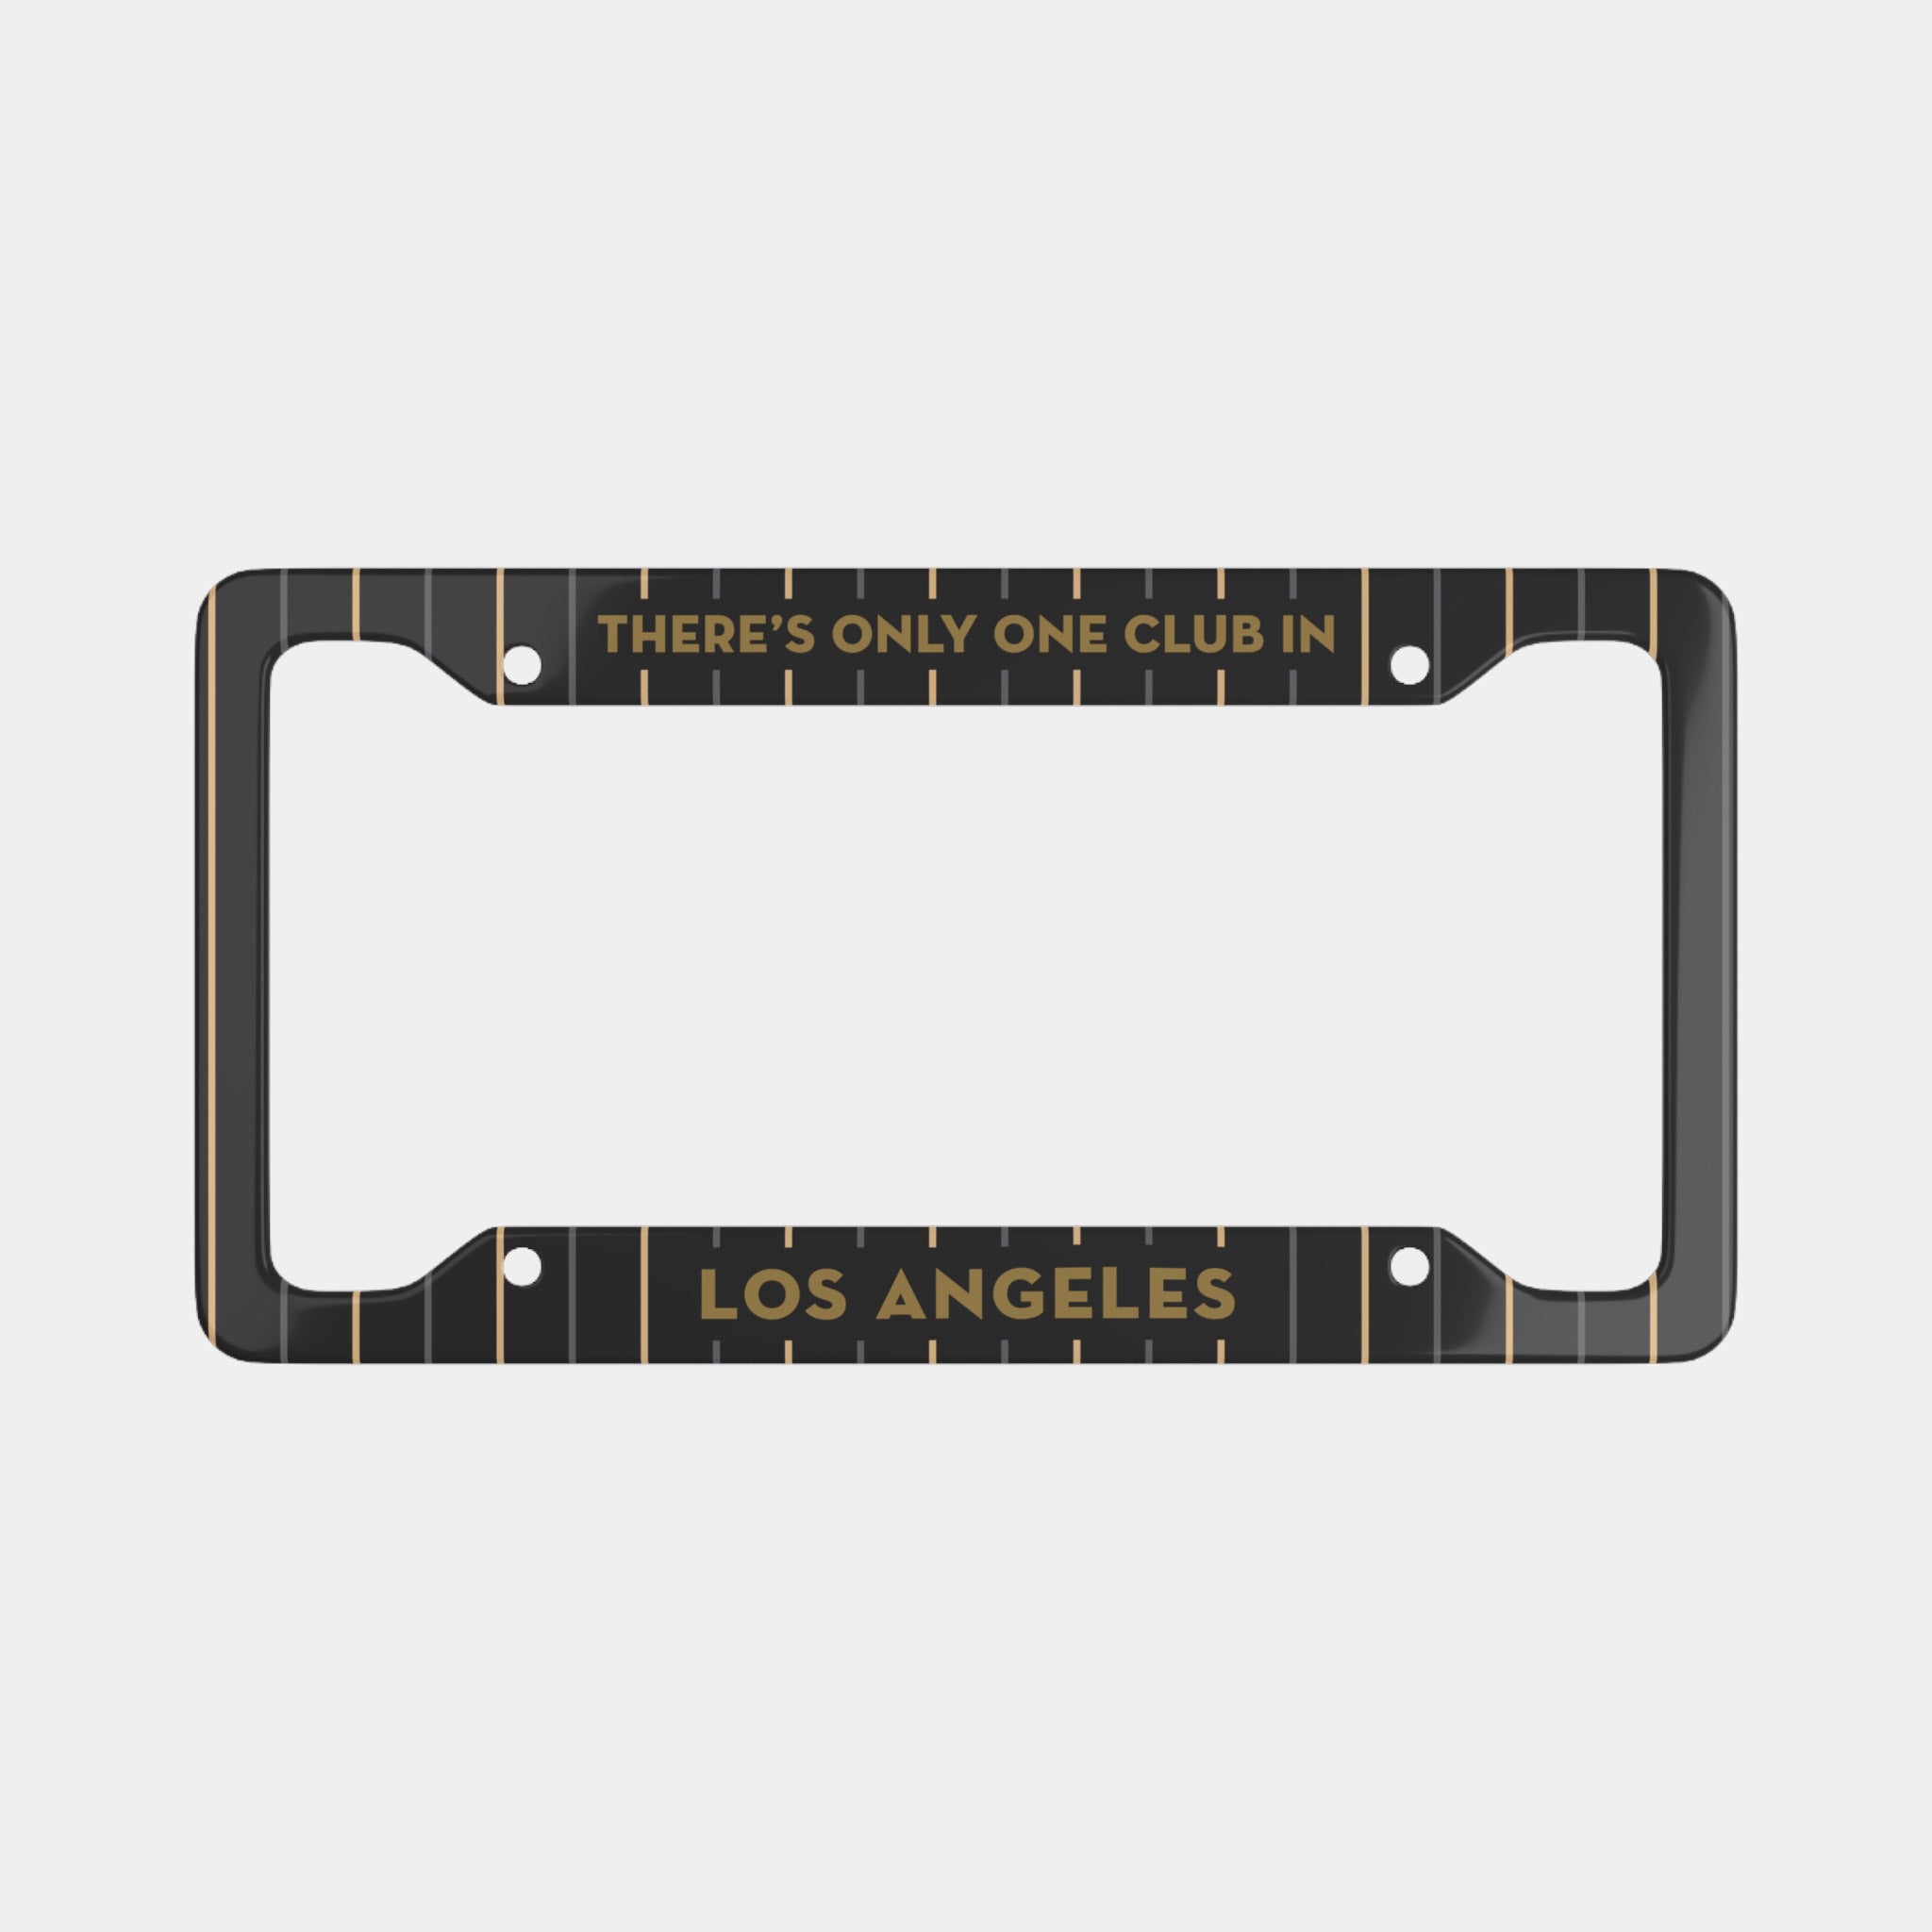 There's Only One Club in Los Angeles (LAFC) License Plate Frame